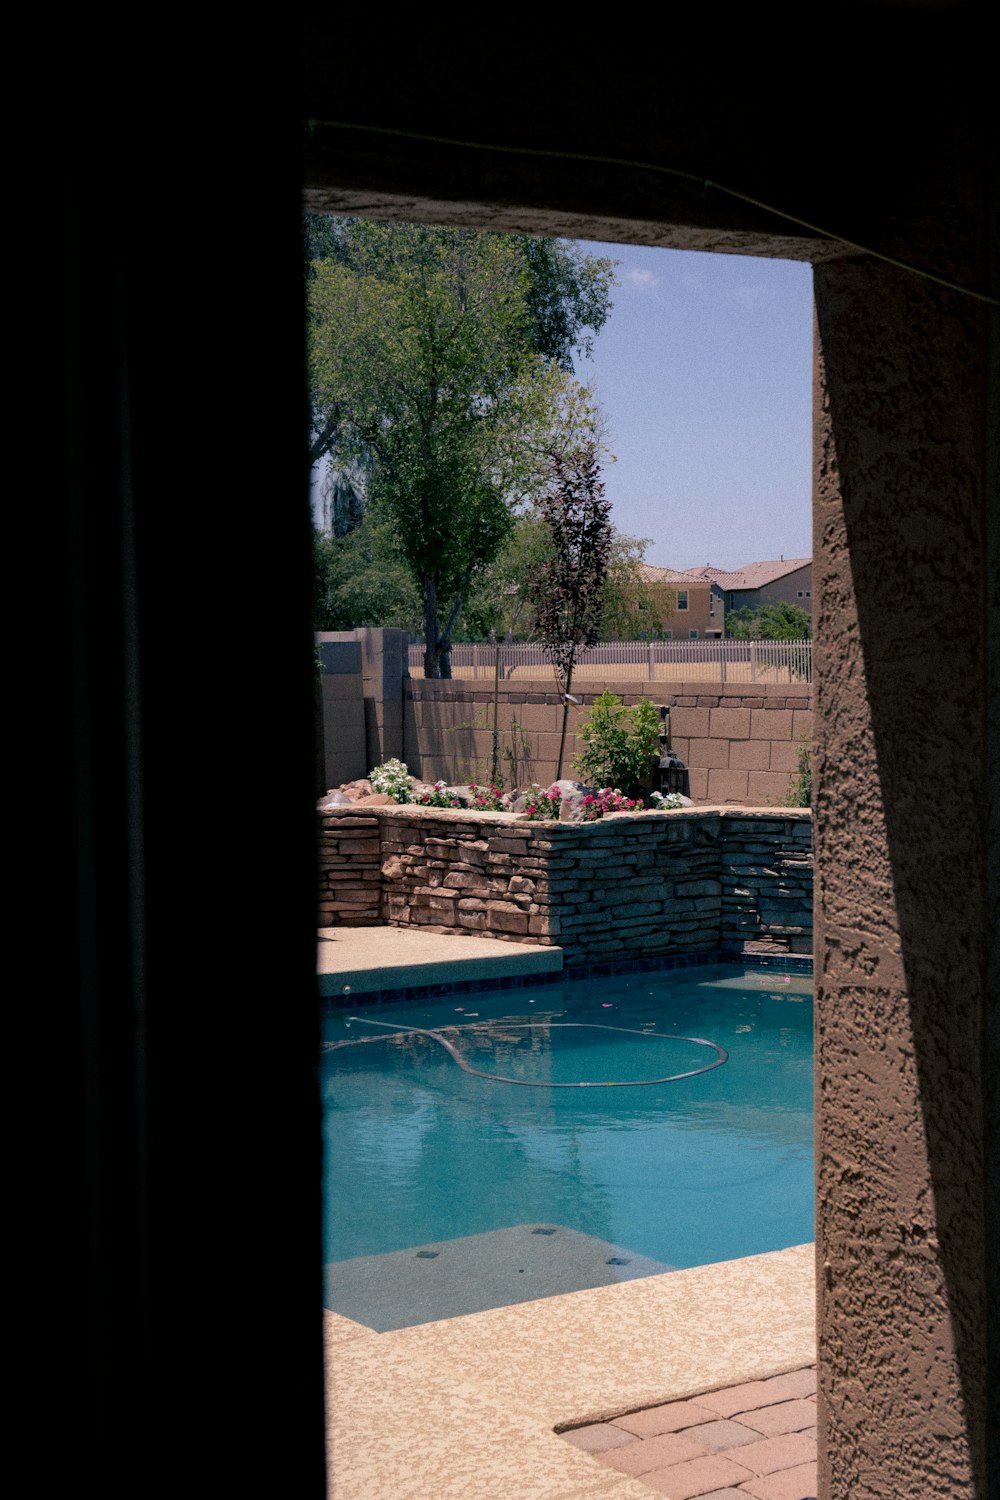 a view of a pool from inside a house